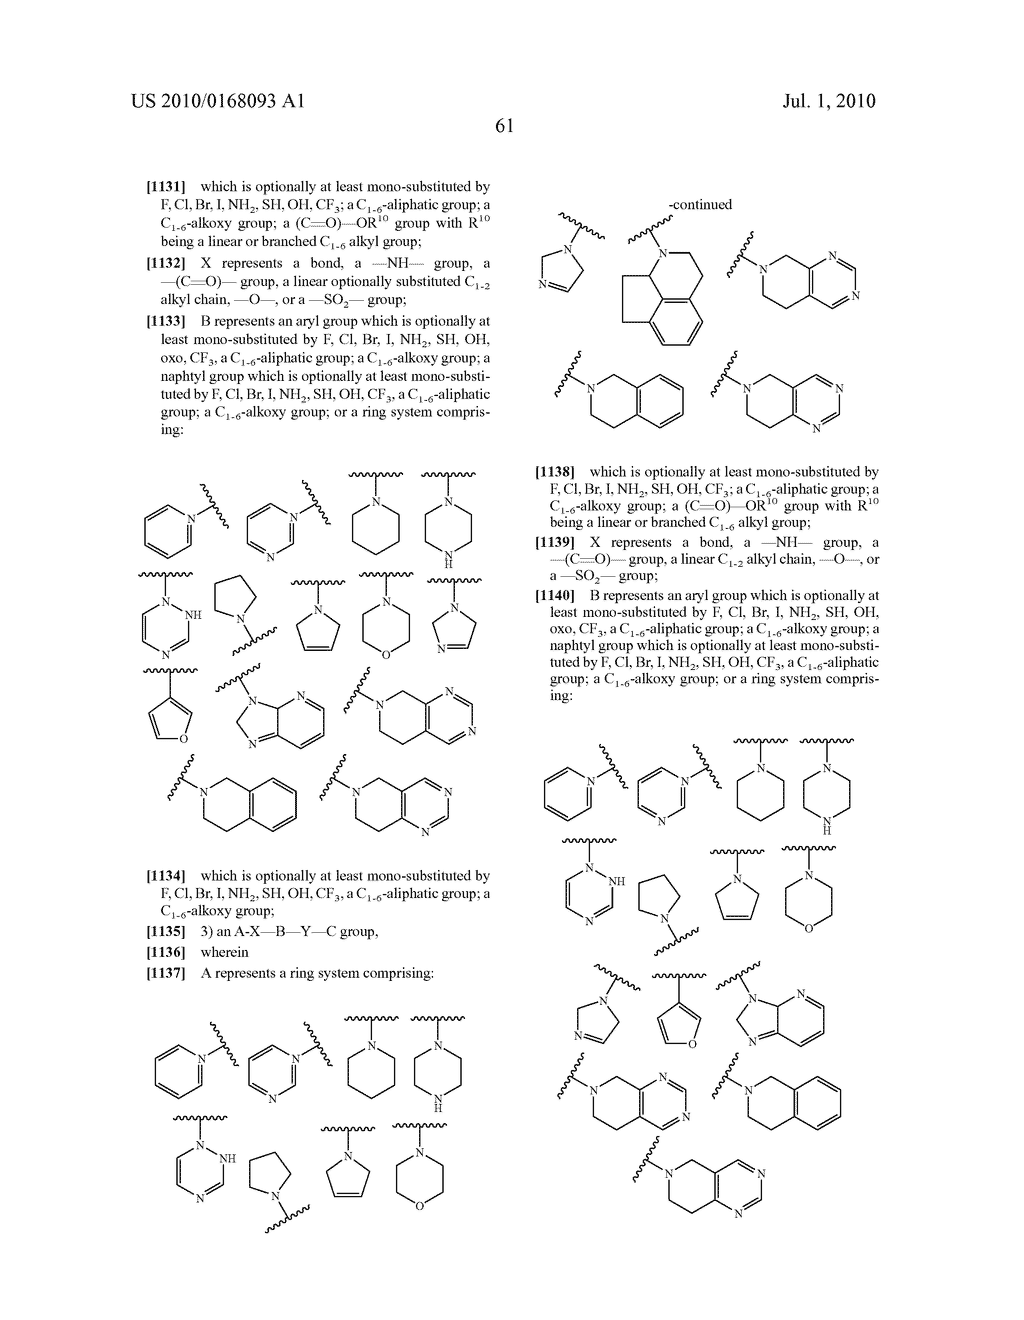 SUBSTITUTED 3-AMINO-4 -HYDROXY PYRROLIDINES COMPOUNDS, THEIR PREPARATION AND USE AS MEDICAMENTS - diagram, schematic, and image 62